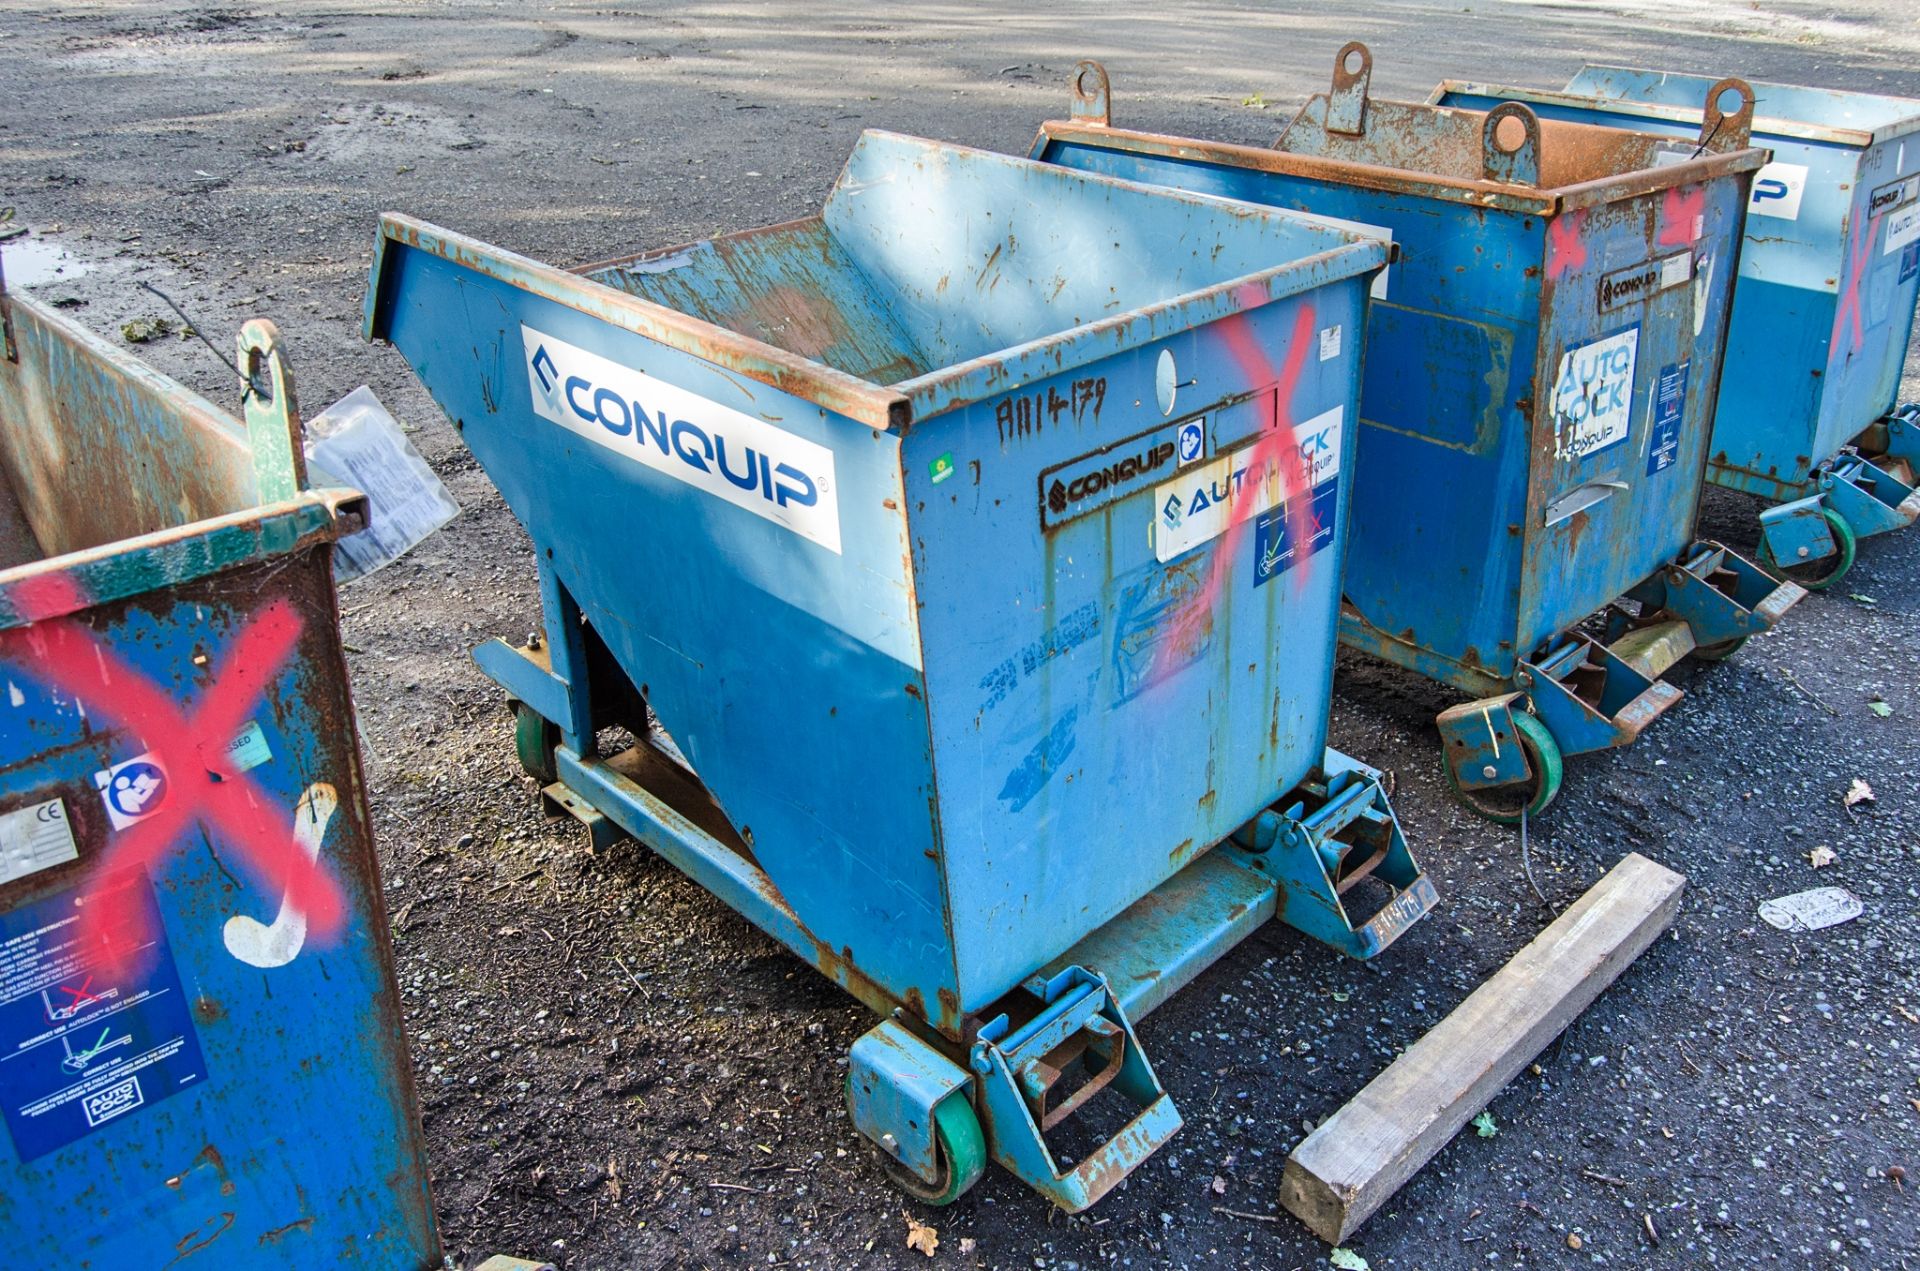 Conquip 1 tonne mobile tipping skip A1114179 - Image 2 of 2